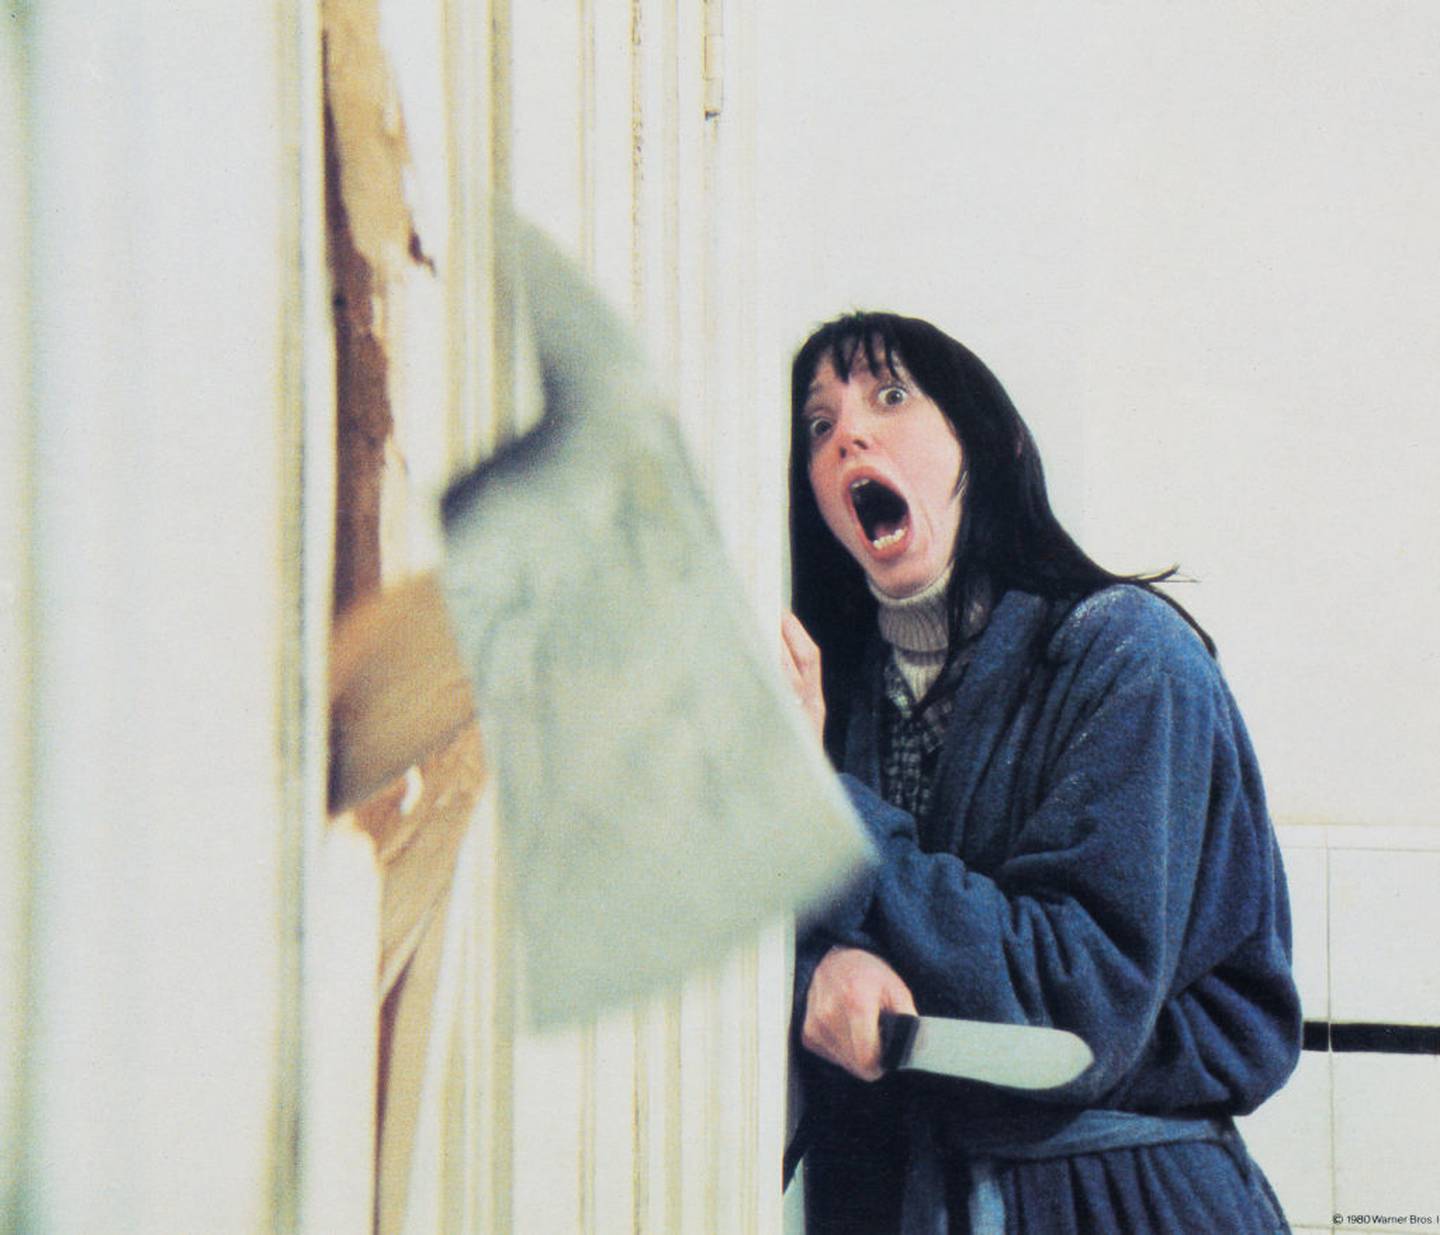 Shelley Duvall in 'The Shining'